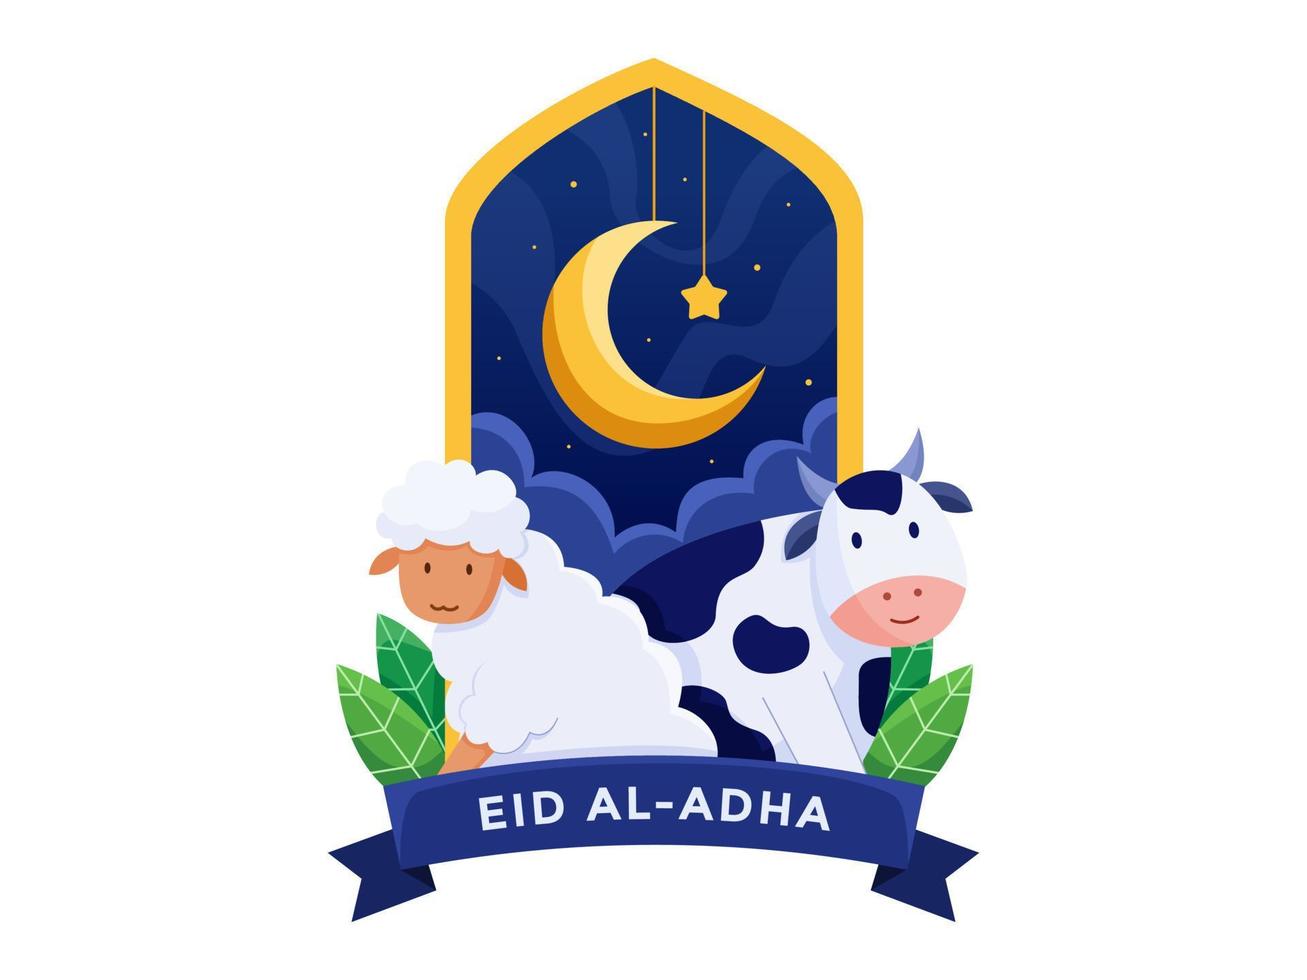 Eid Al Adha Cartoon Illustration With Cute Sheep And Cow Suitable for Greeting card, postcard, poster, banner, print, web, landing page, etc vector